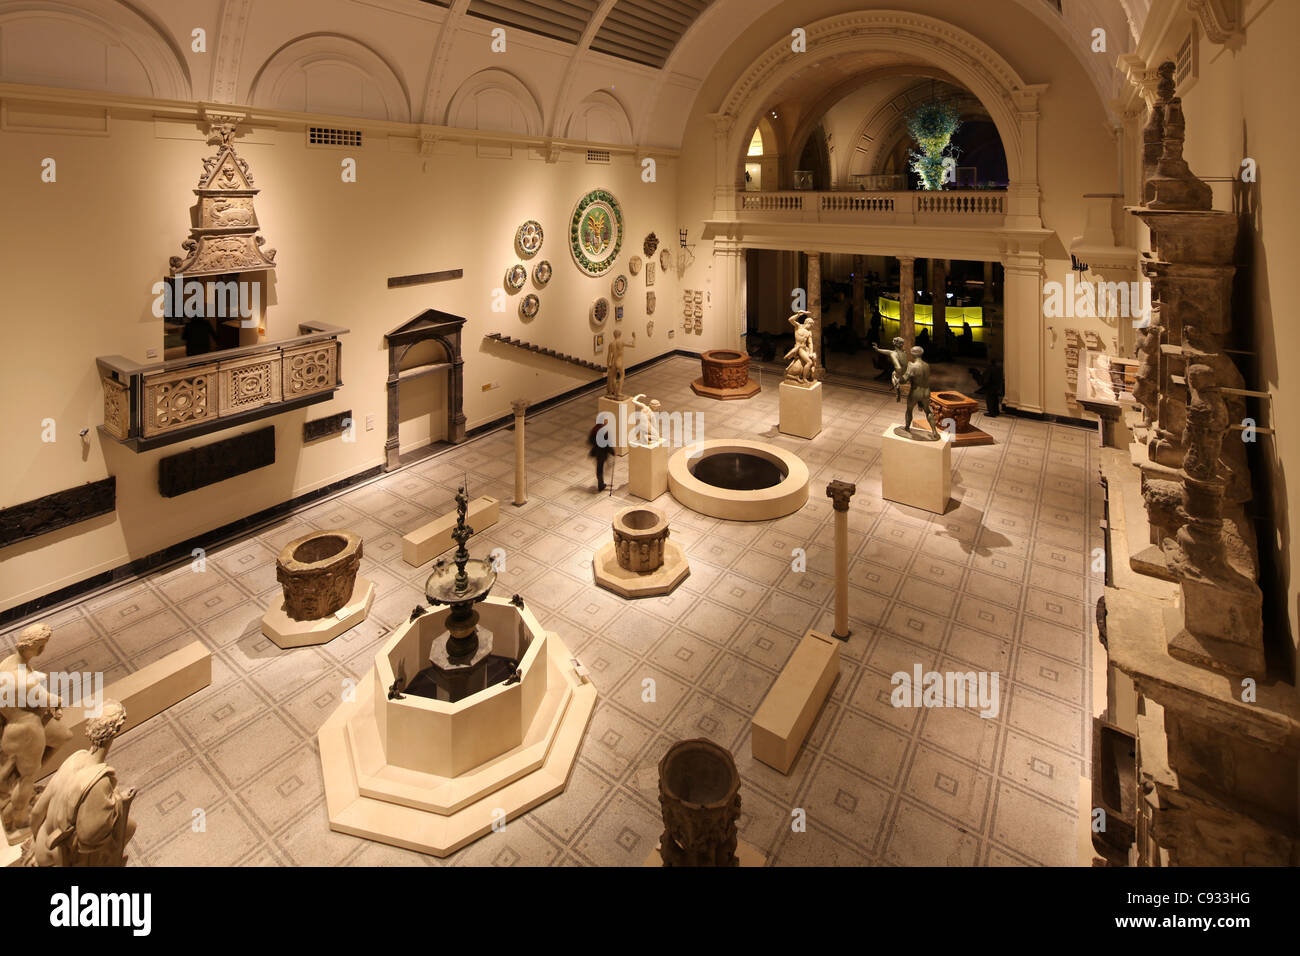 The Victoria And Albert Museum Interior Stock Photos & The Victoria And ...